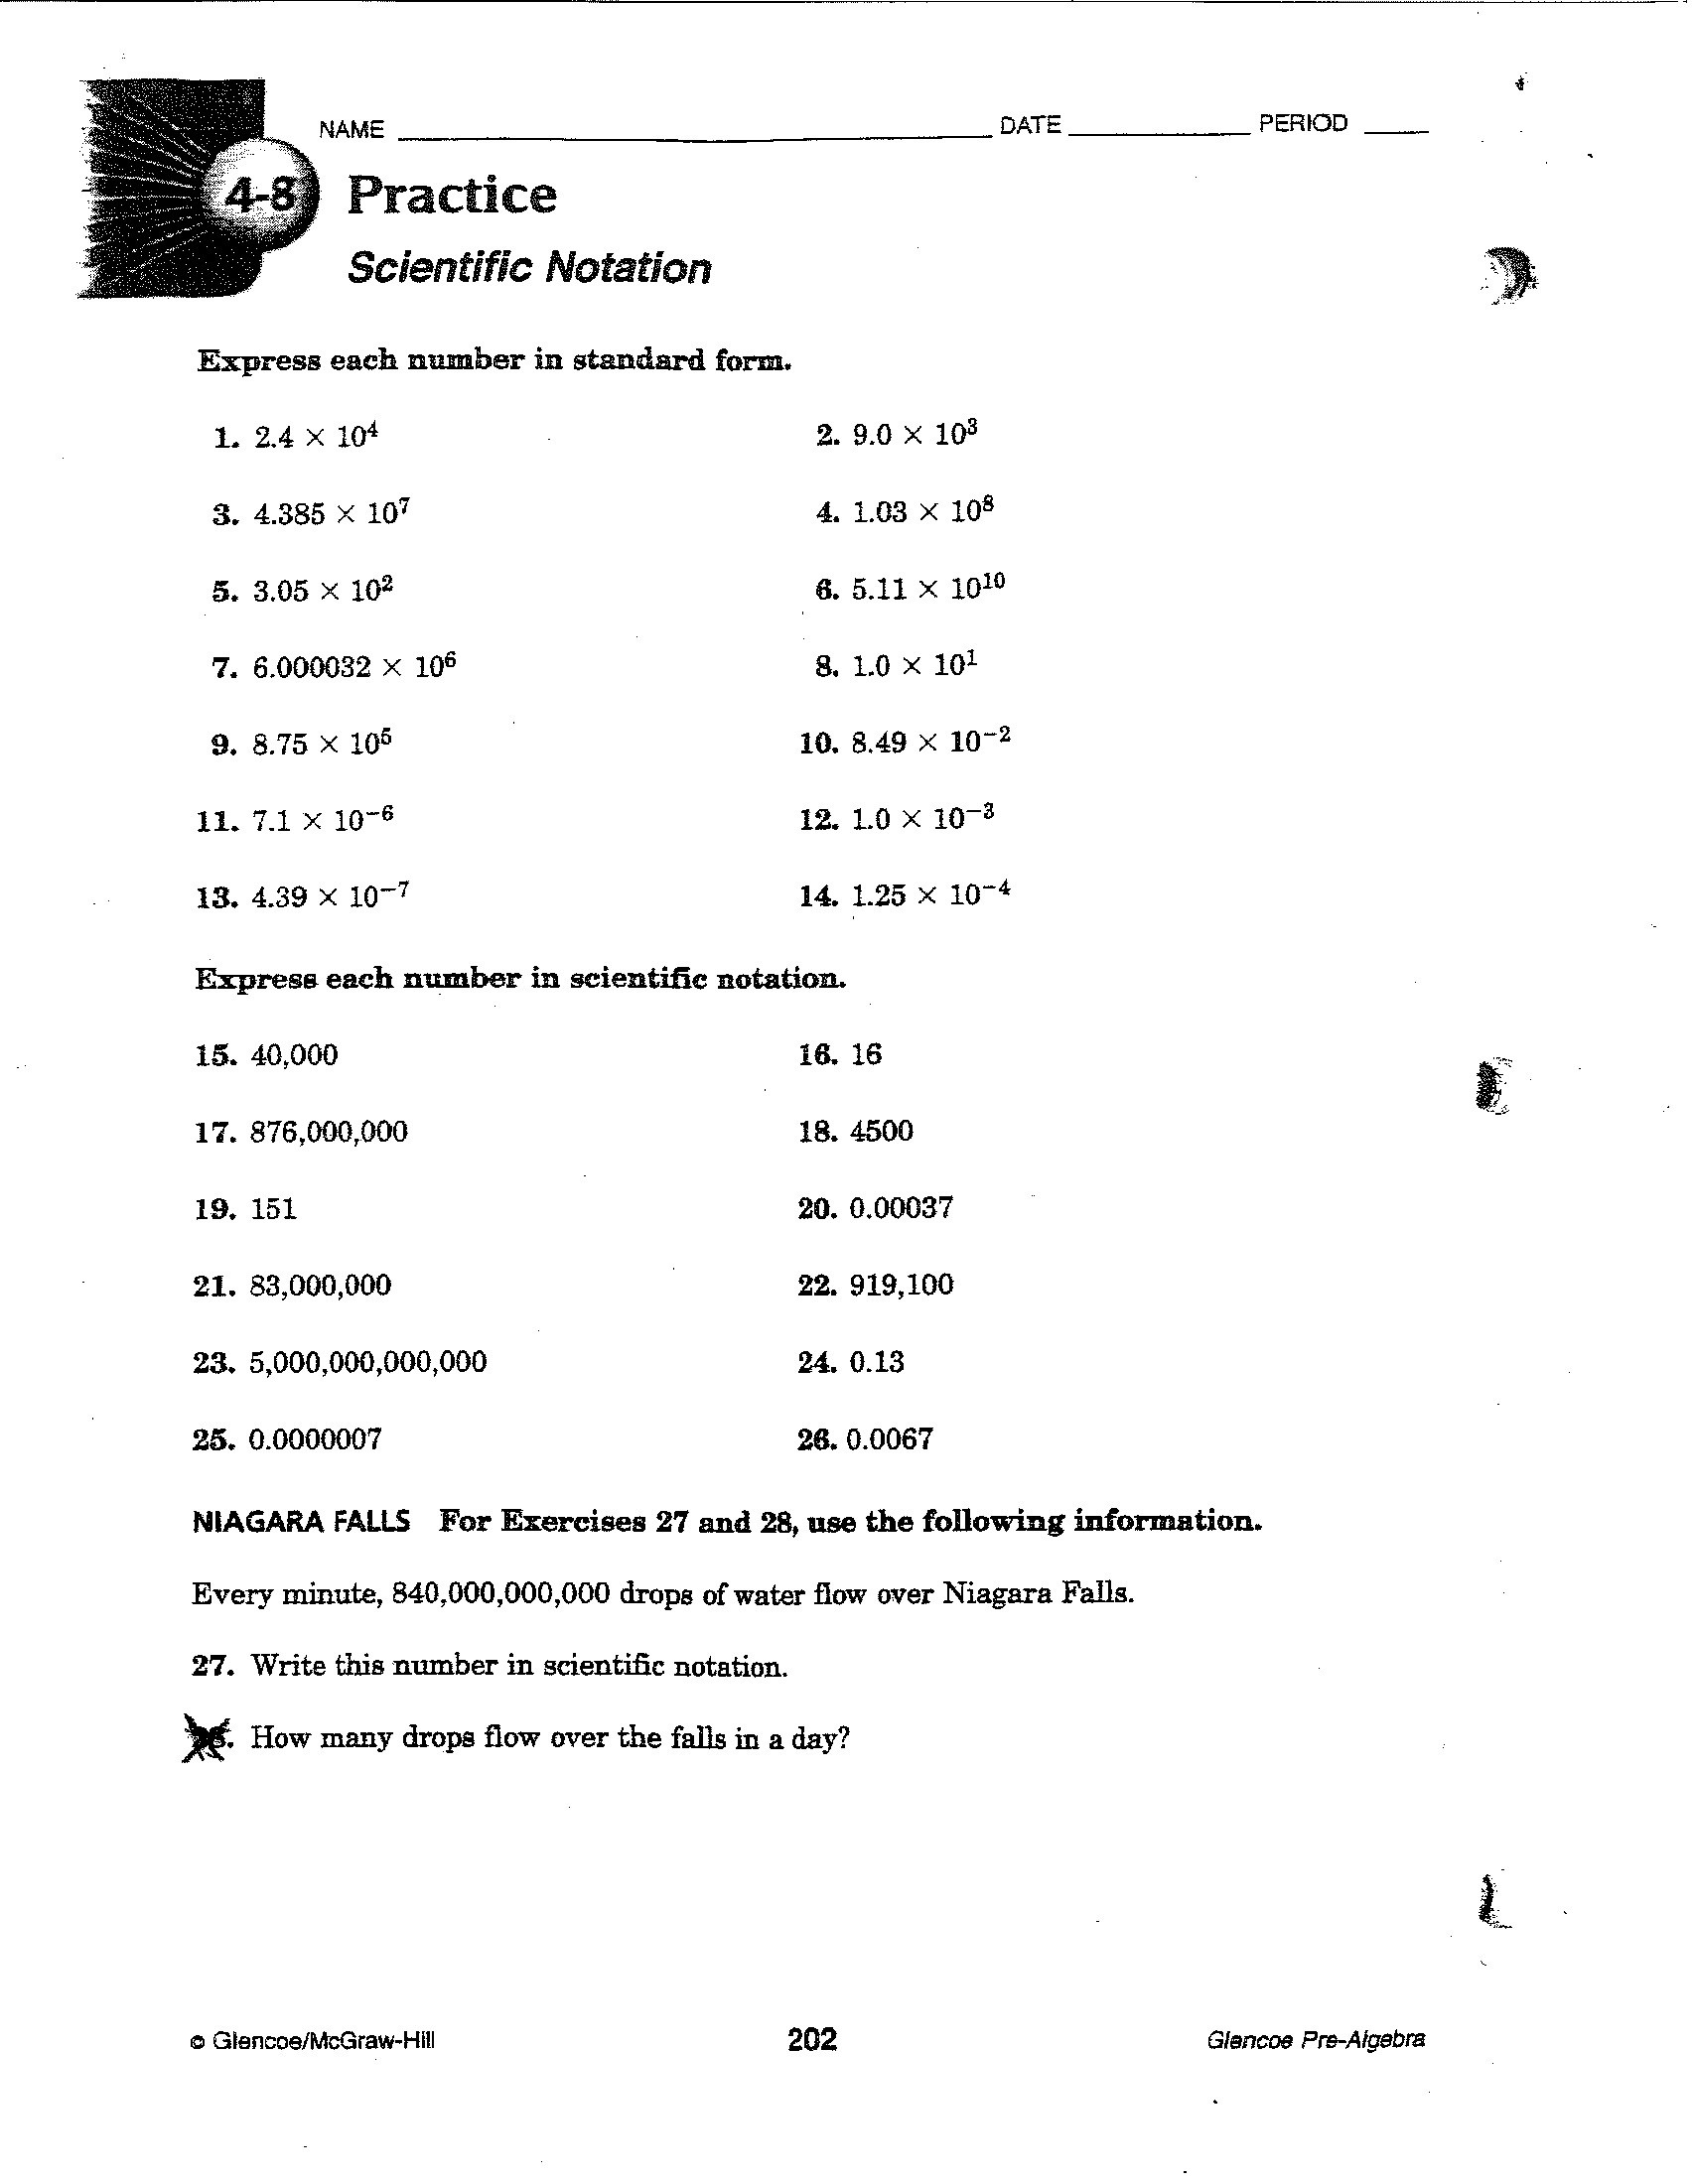 Scientific Notation Worksheet with Answers 29 Scientific Notation Word Problems Worksheet 8th Grade